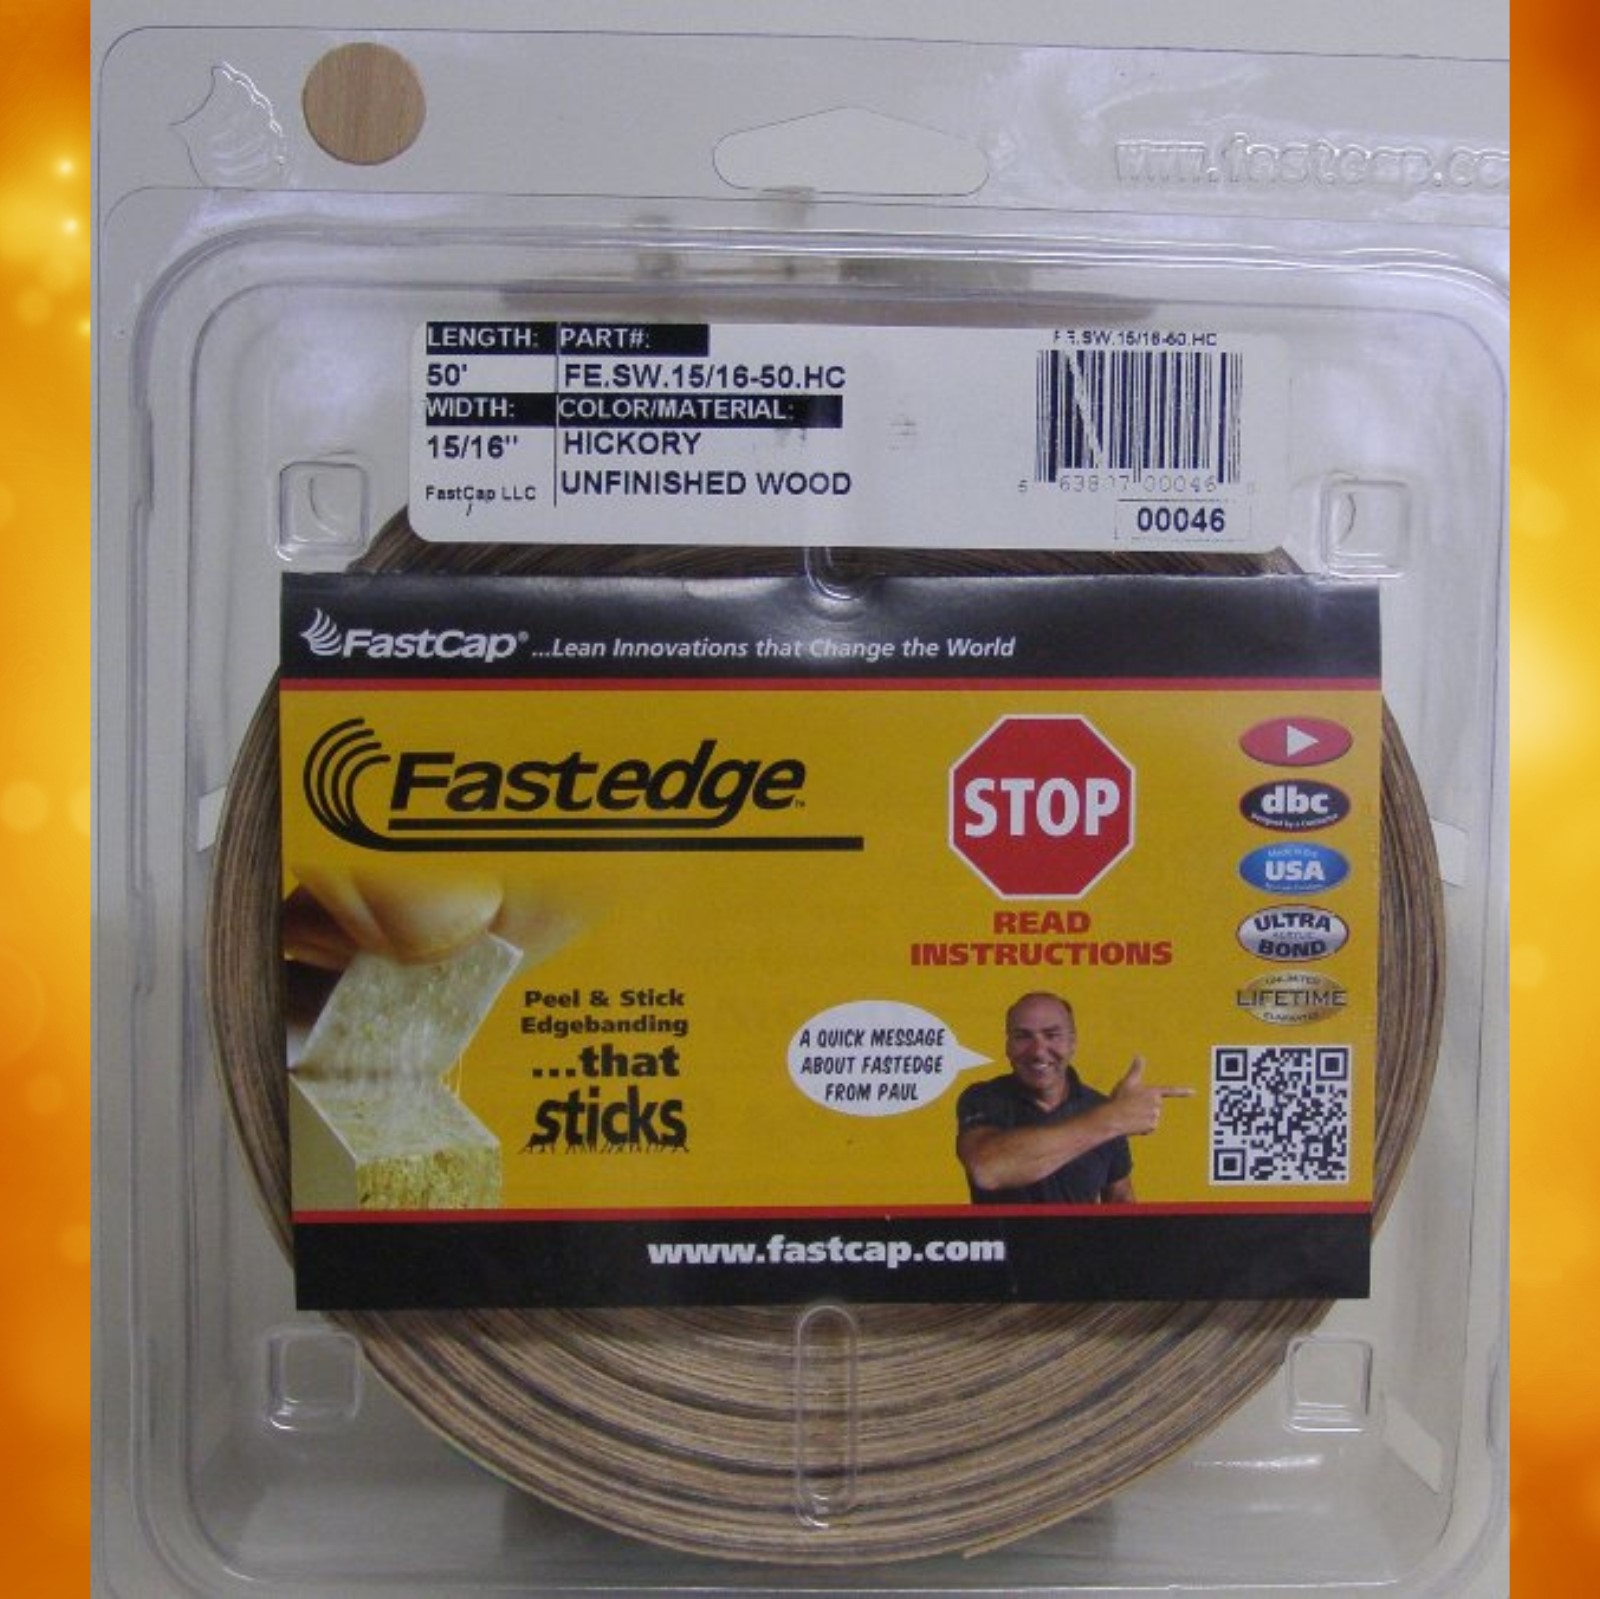 FastCap Hickory FE.SW.15/16-50.HC Edge Banding Tape Unfinished Solid Wood 15/16&quot; 50 ft Roll
FE.SW.15/16-50.HC